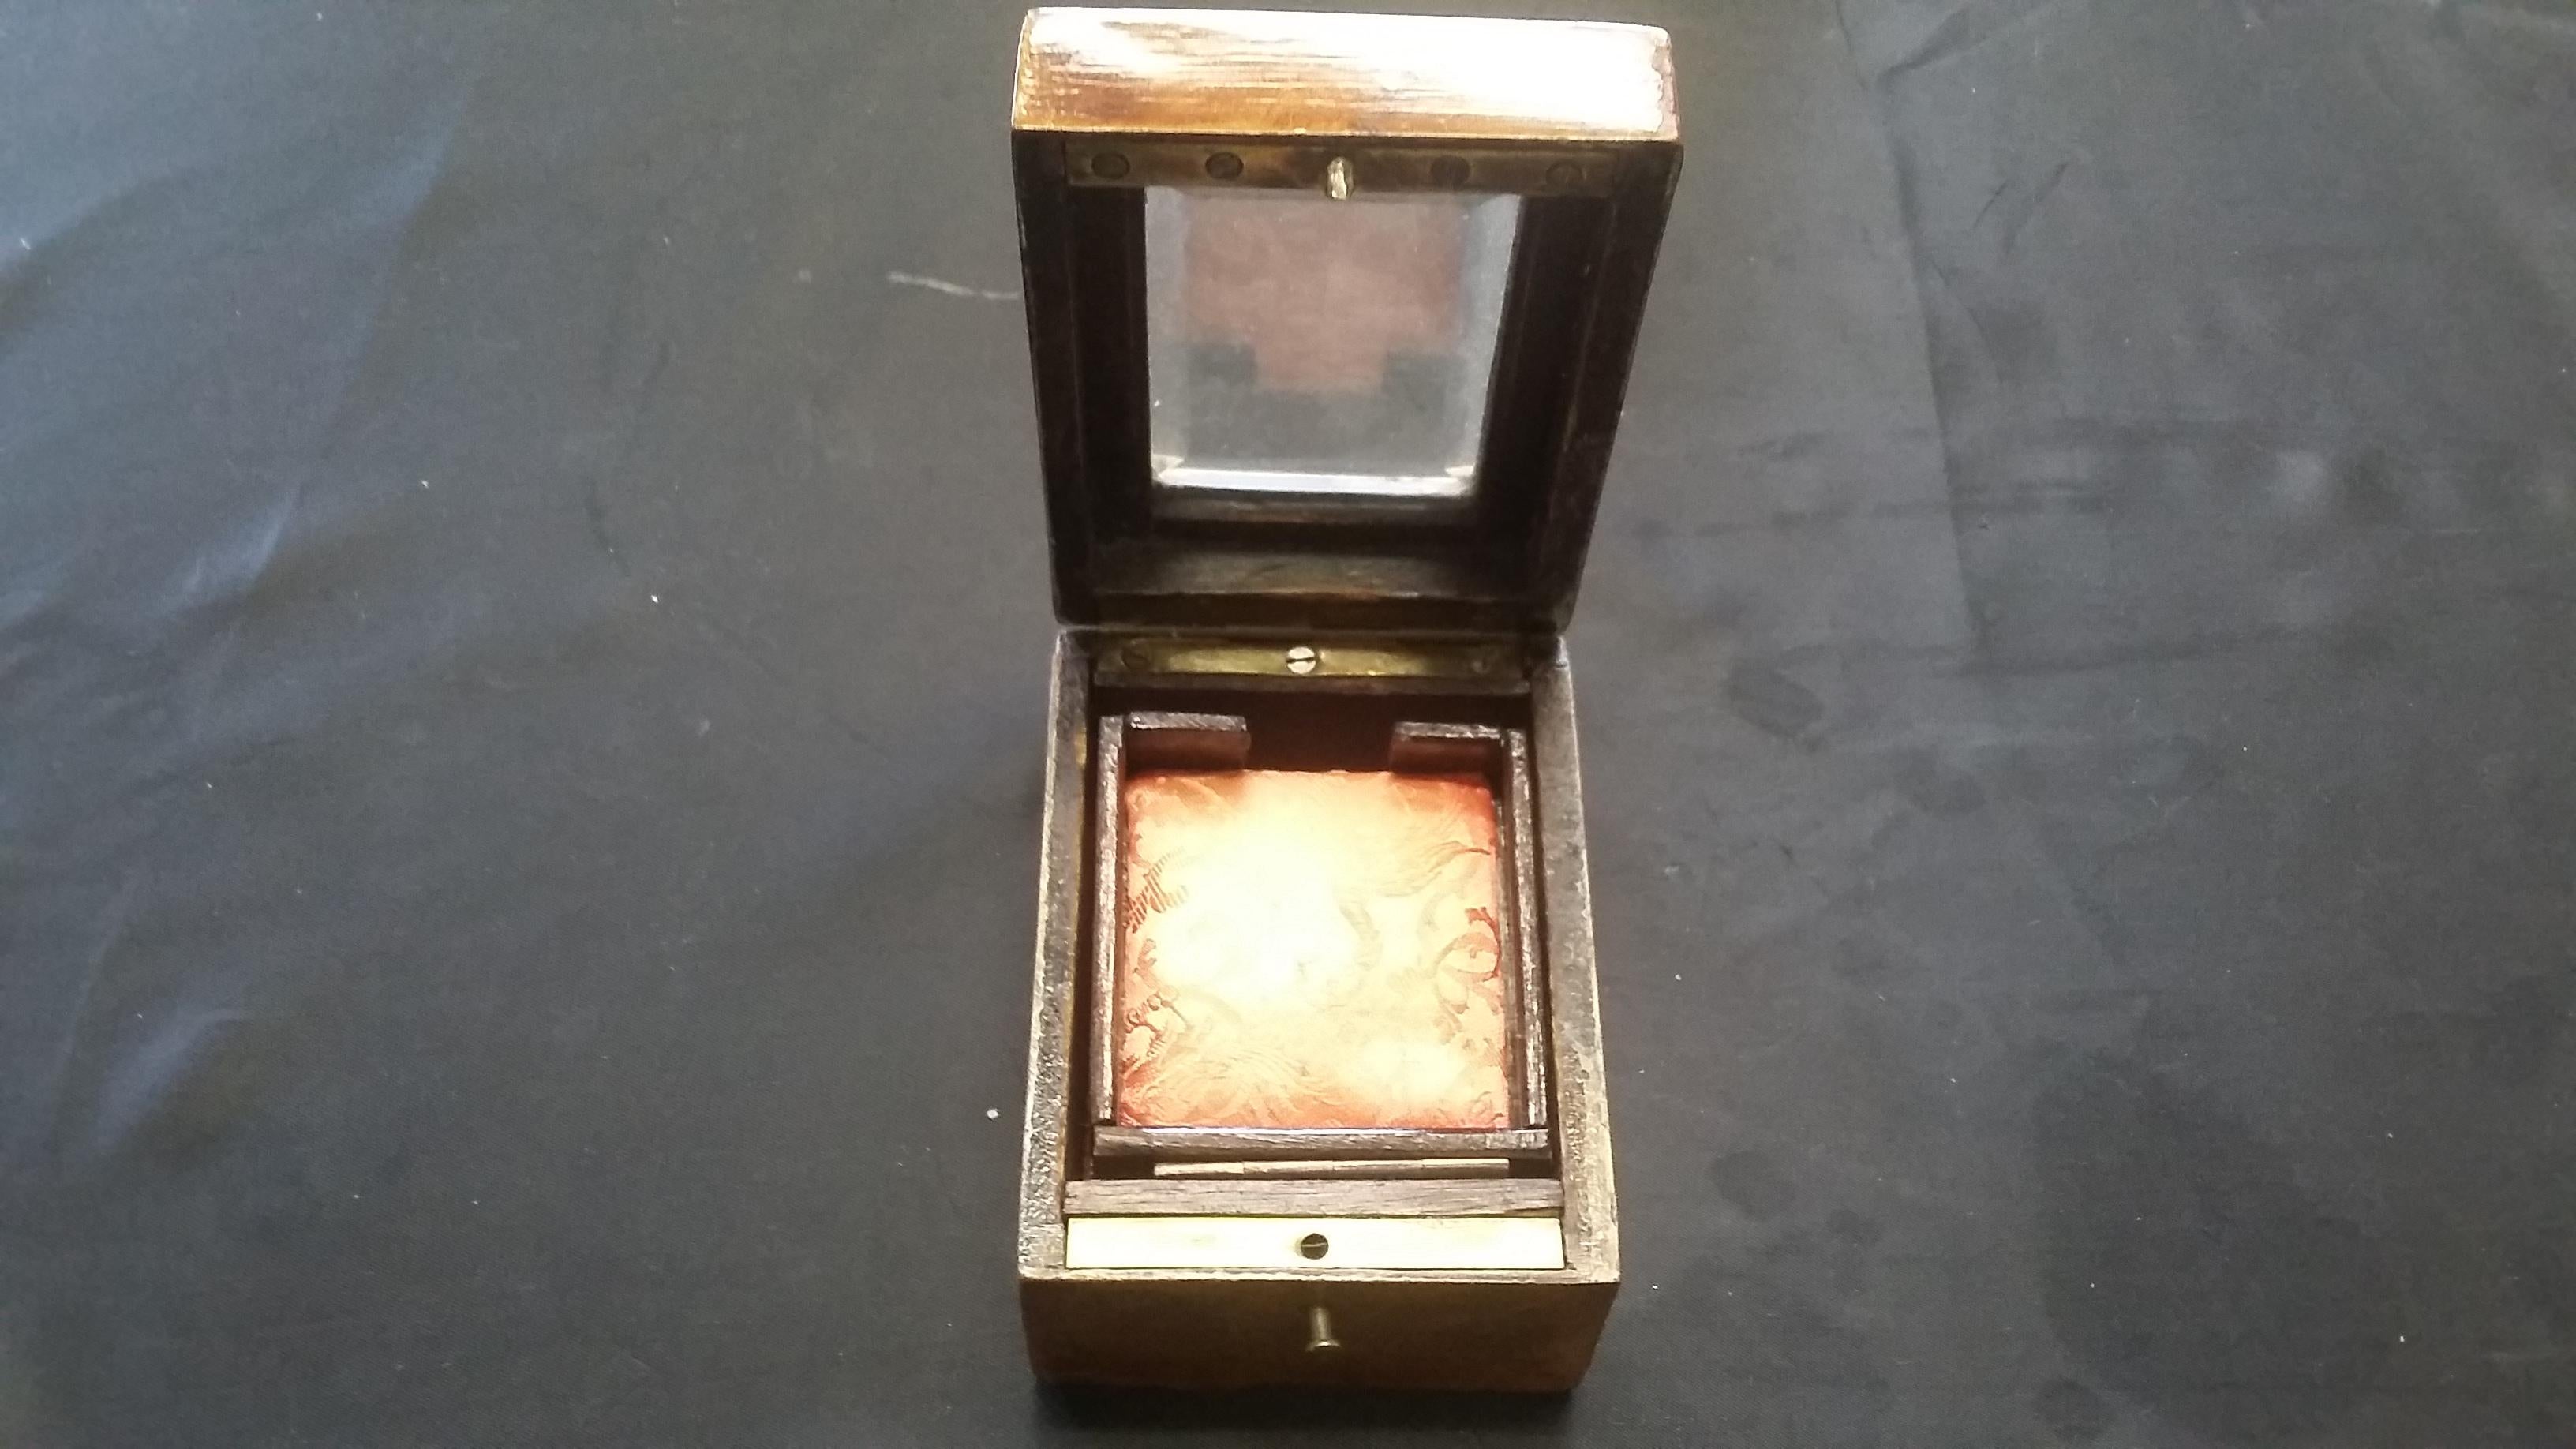 French Amboyna display box with beveled glass. Box has original lining and may have been used for jewelry or watch holder, circa 1870.